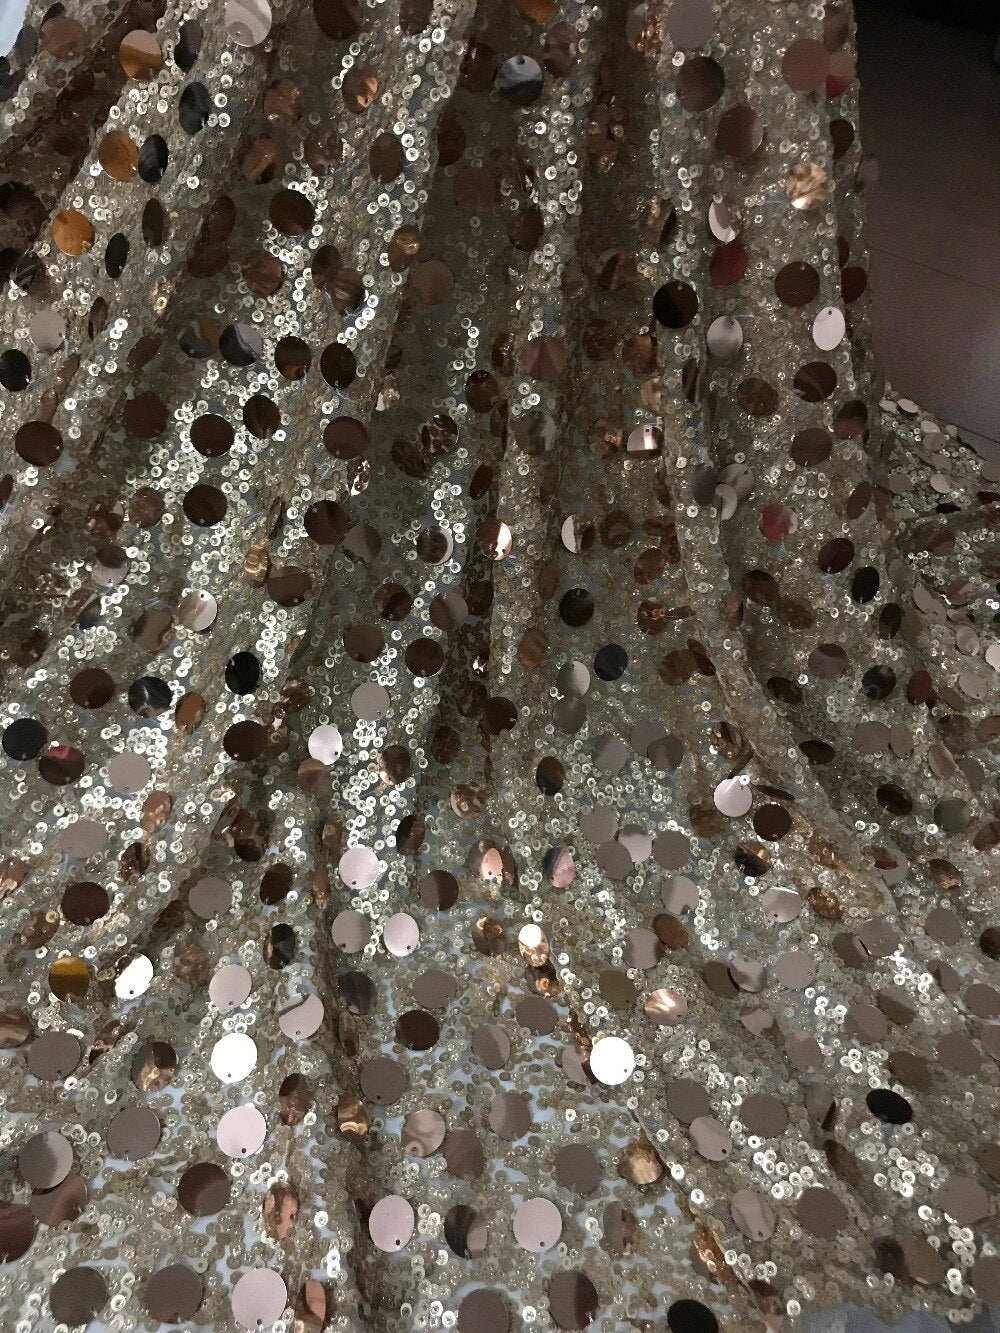 5 YARDS / Joanna Floral Beaded Embroidery Glitter Mesh Lace  Party Prom Bridal Dress Fabric